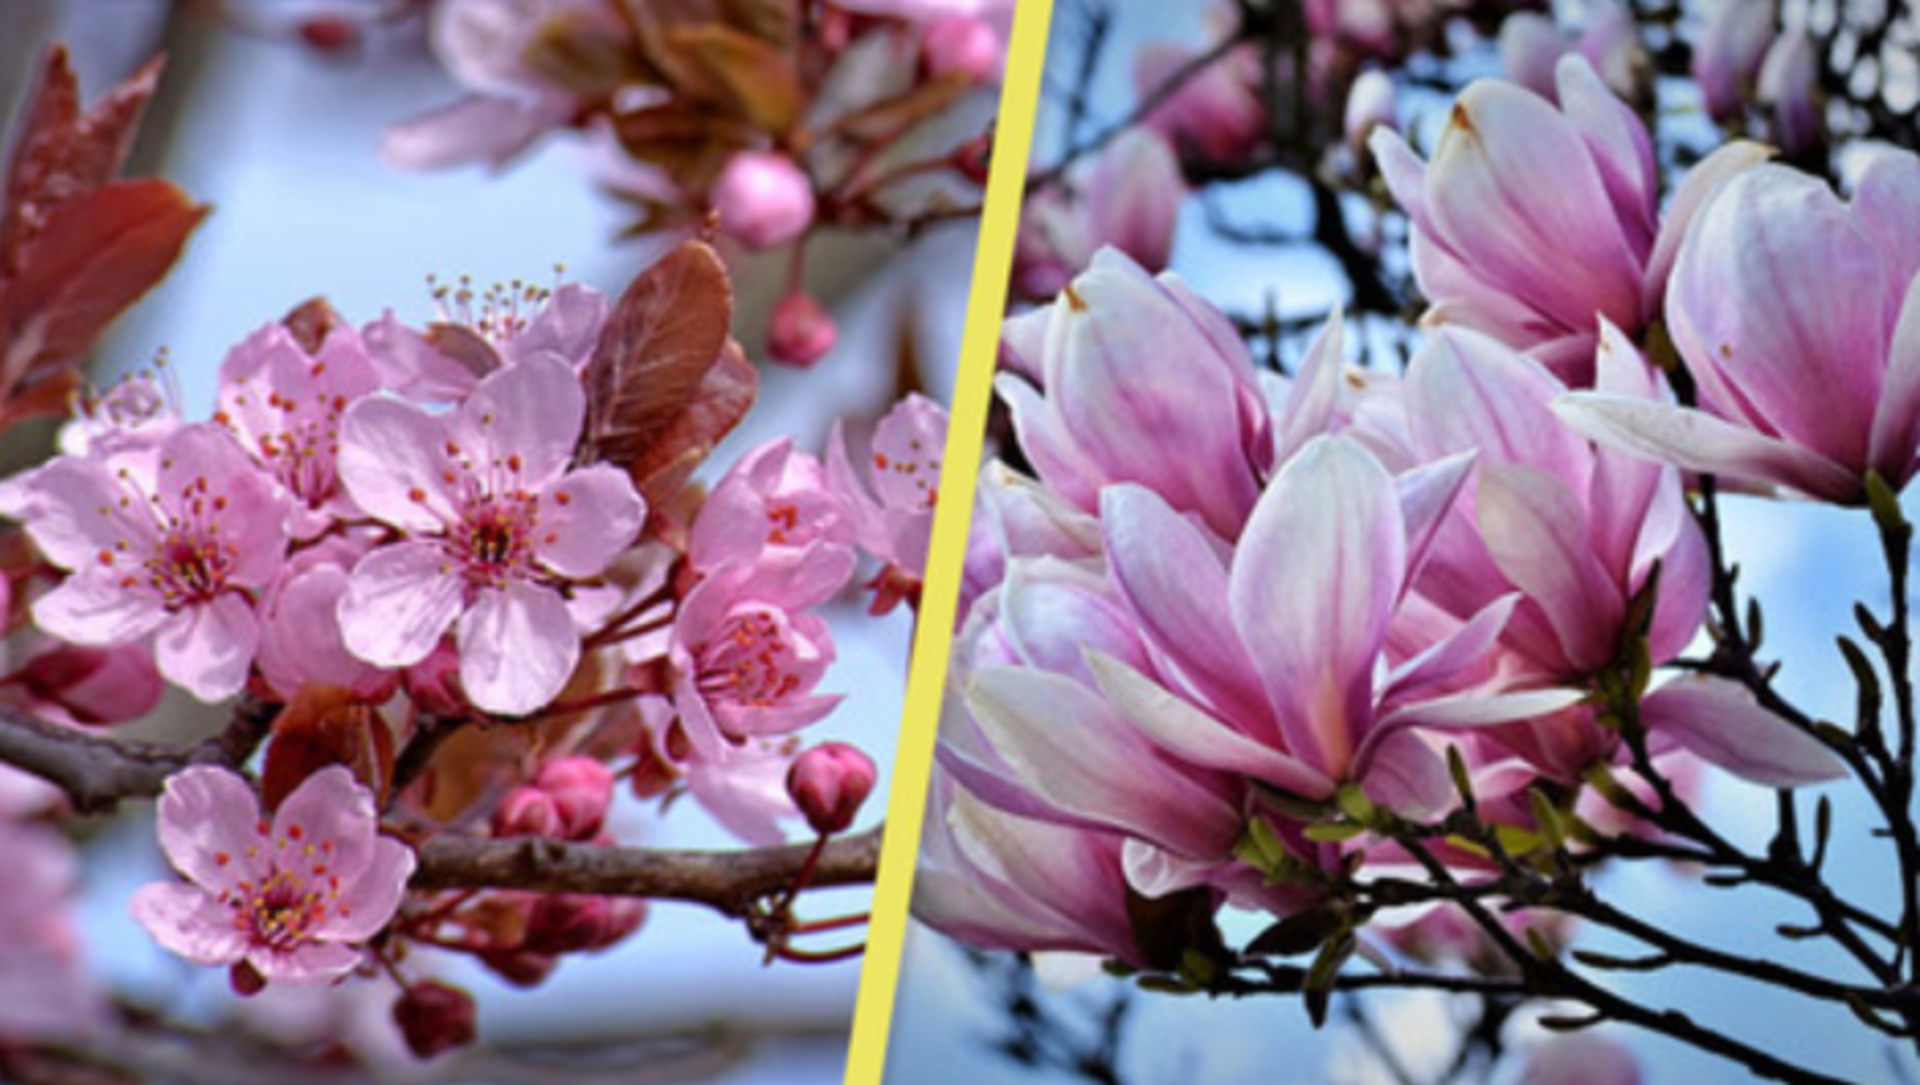 Is it a cherry blossom or a magnolia? Here's how to tell them apart